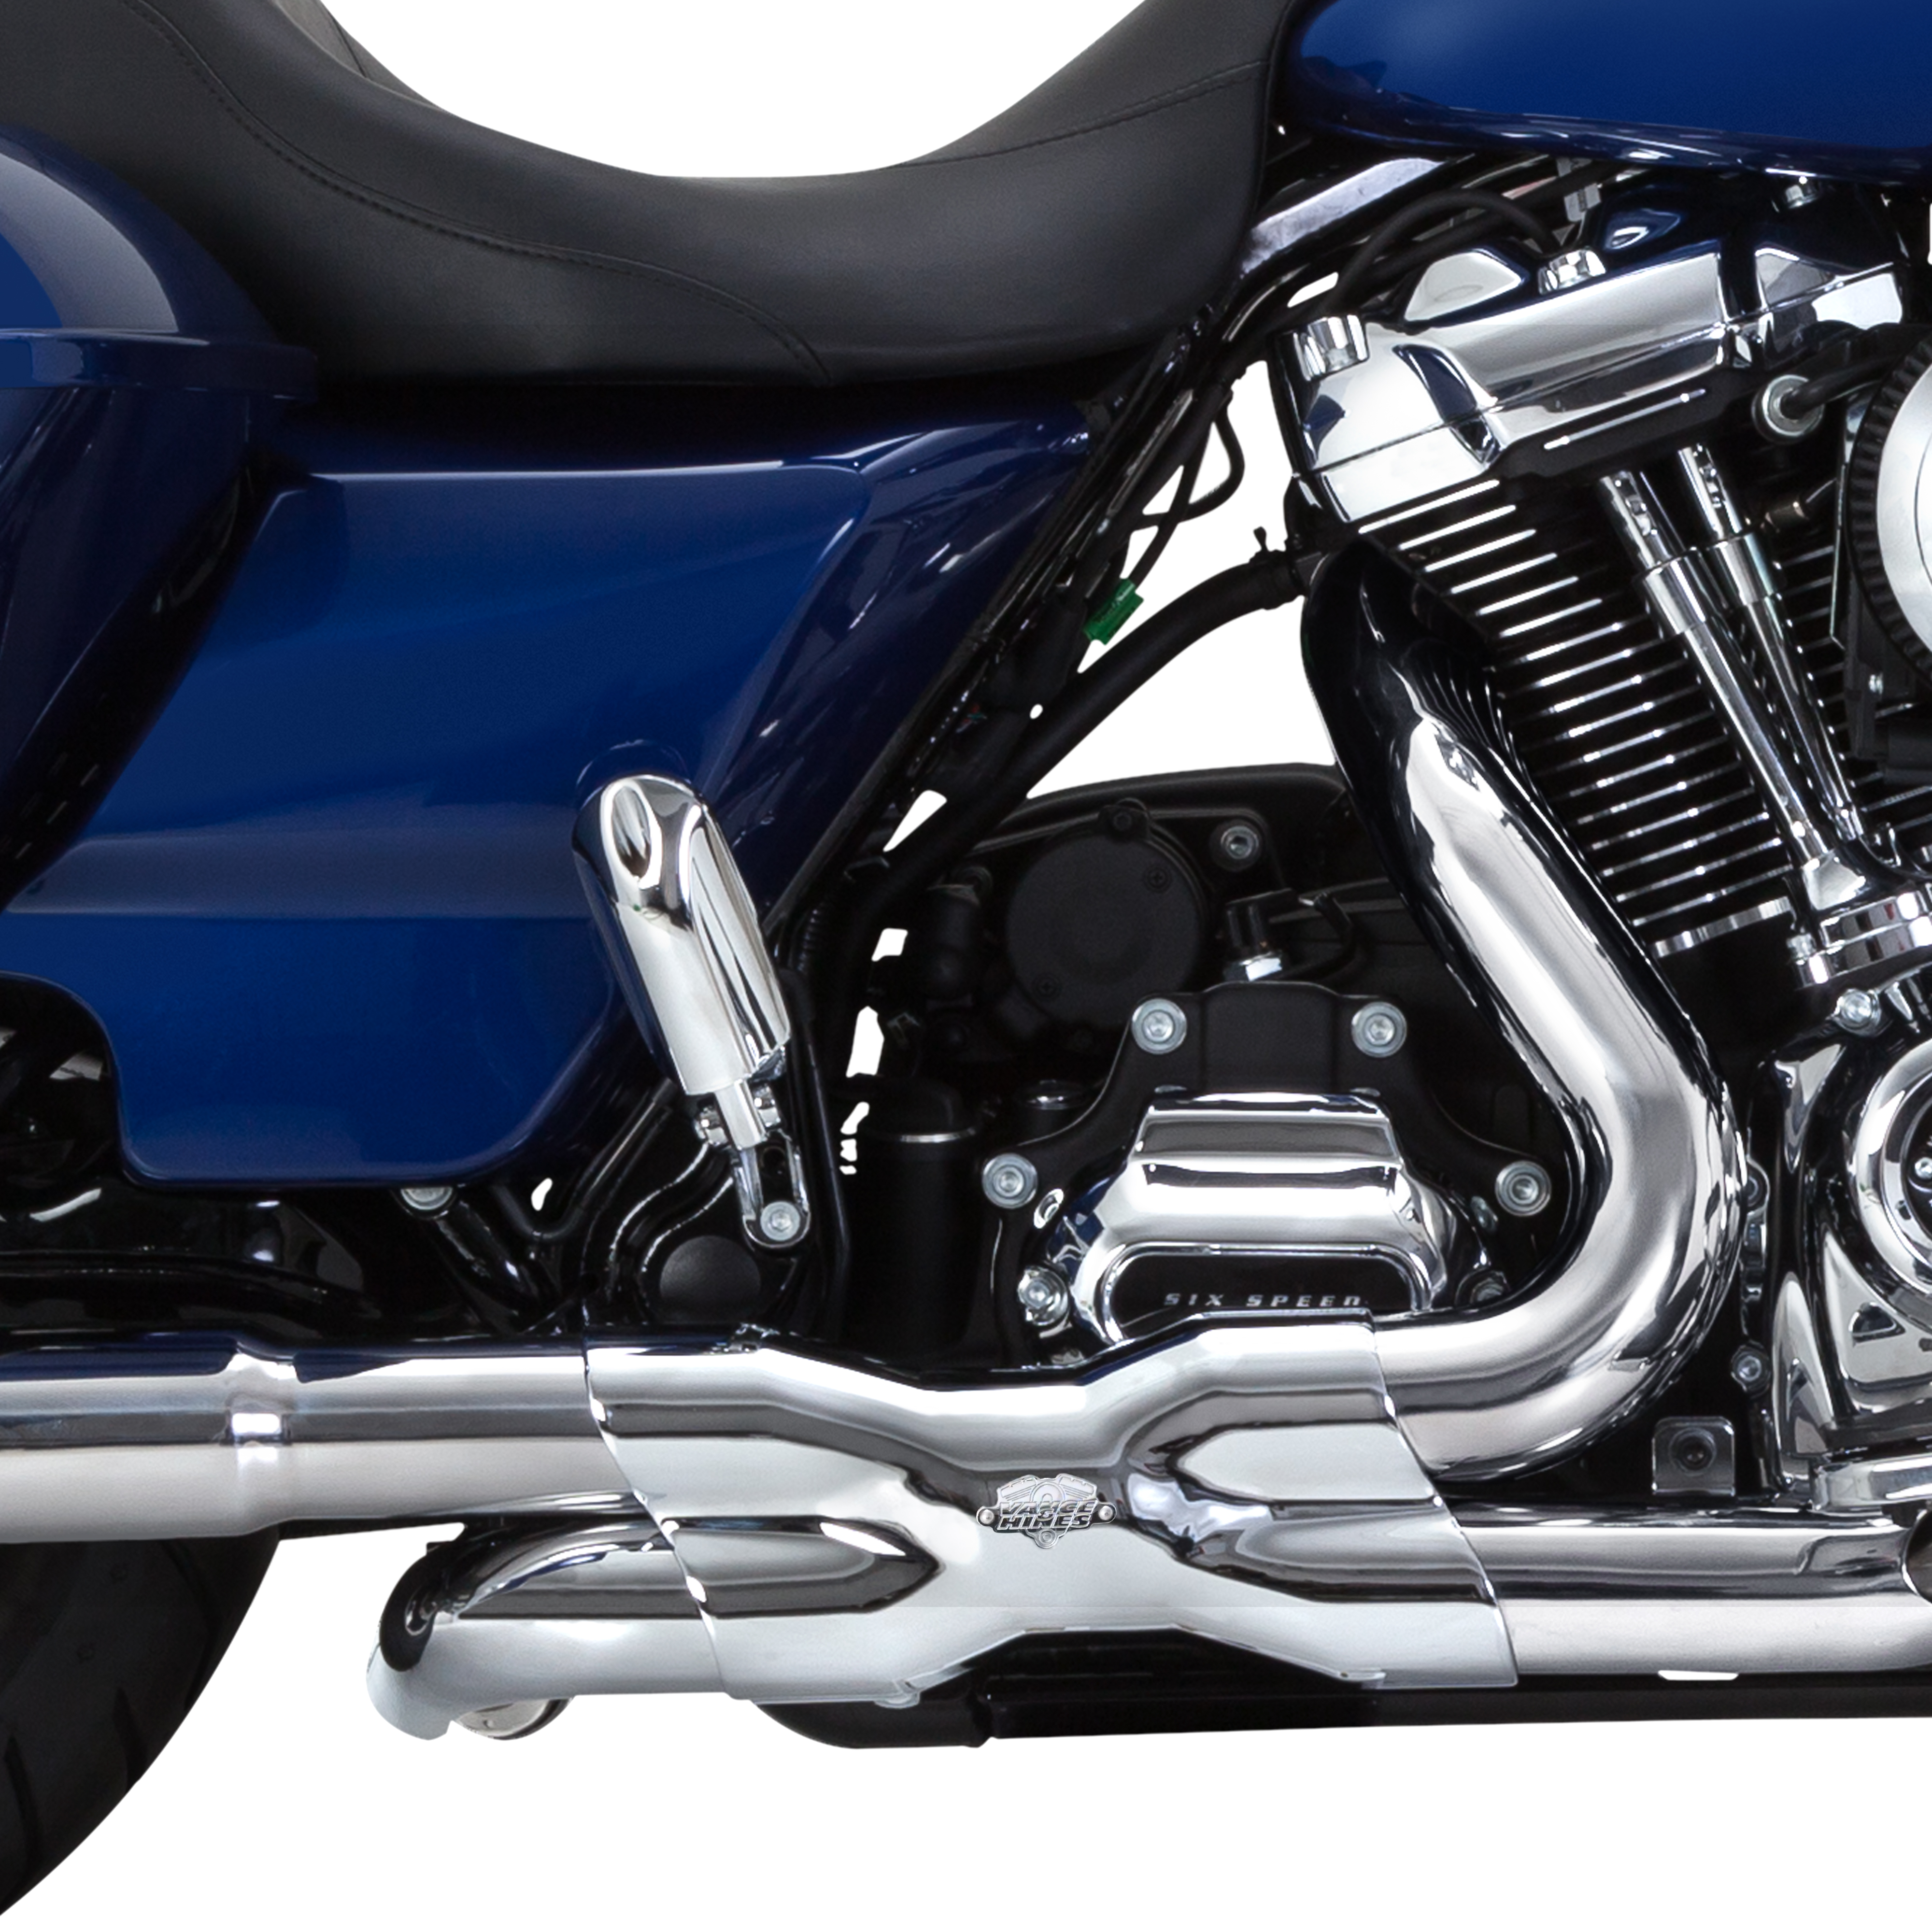 Chrome Dual Headpipes - Fits Many 17-22 Harley Davidson Touring FLH FLT - Click Image to Close